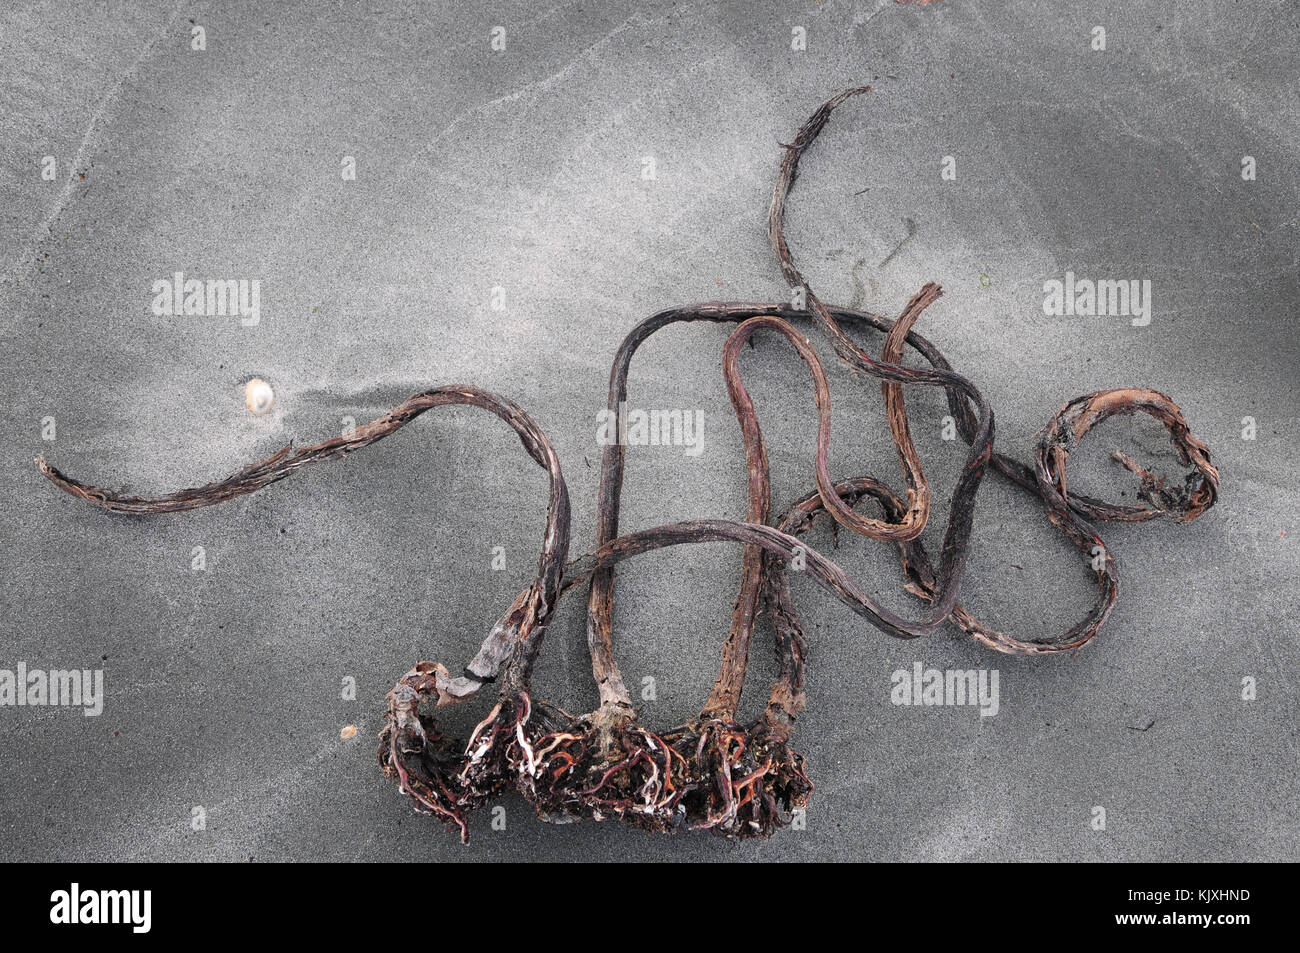 Dried kelp stalks and holdfasts lying on a sandy beach Stock Photo